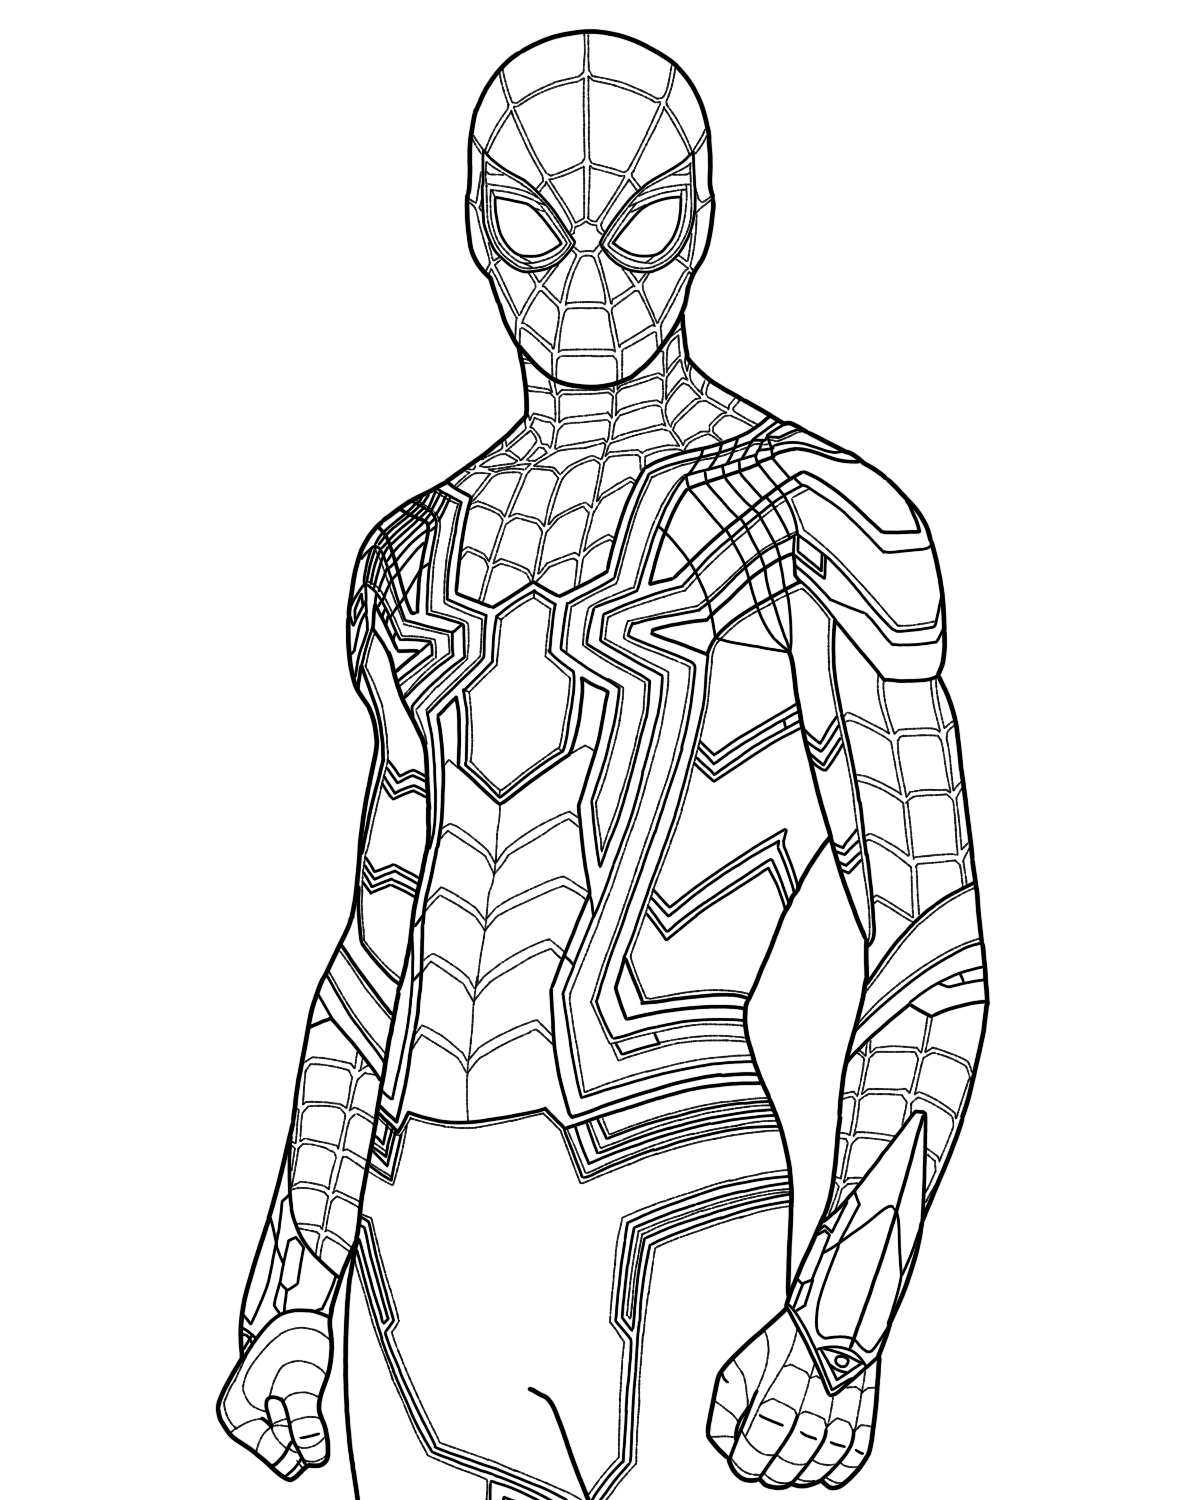 Iron Spider Coloring Pages - Coloring Home